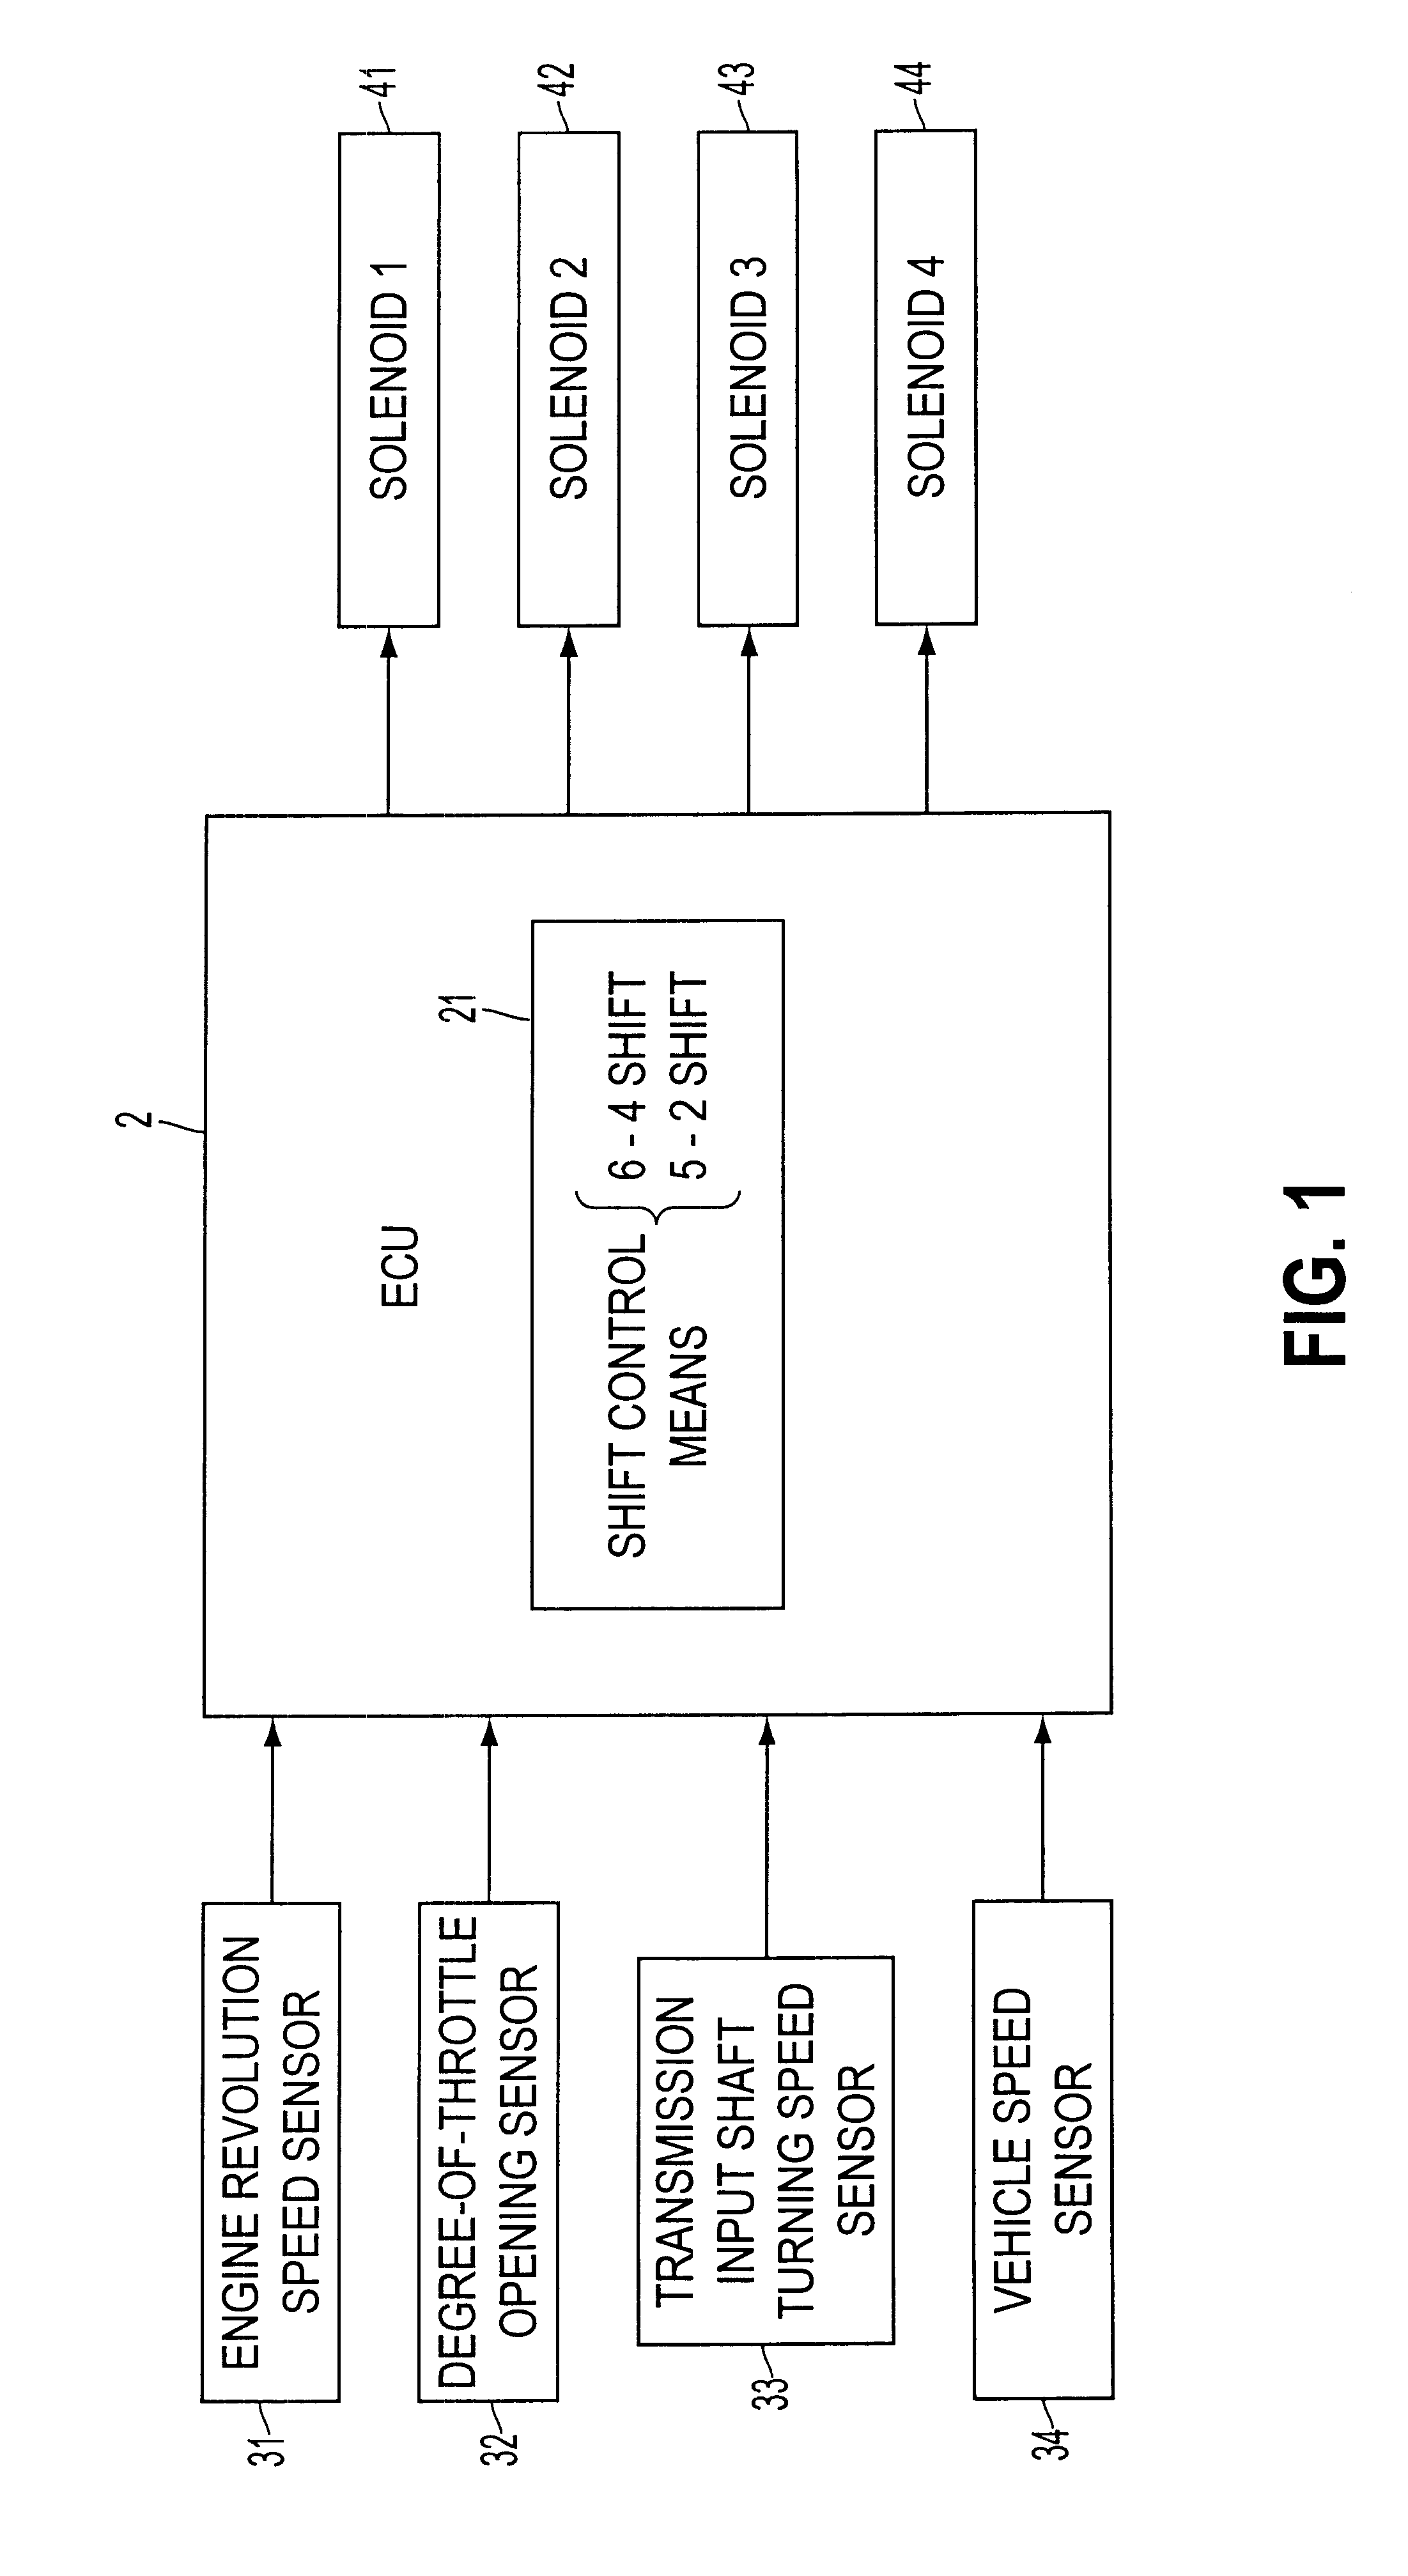 Speed shift control apparatus of automatic transmission